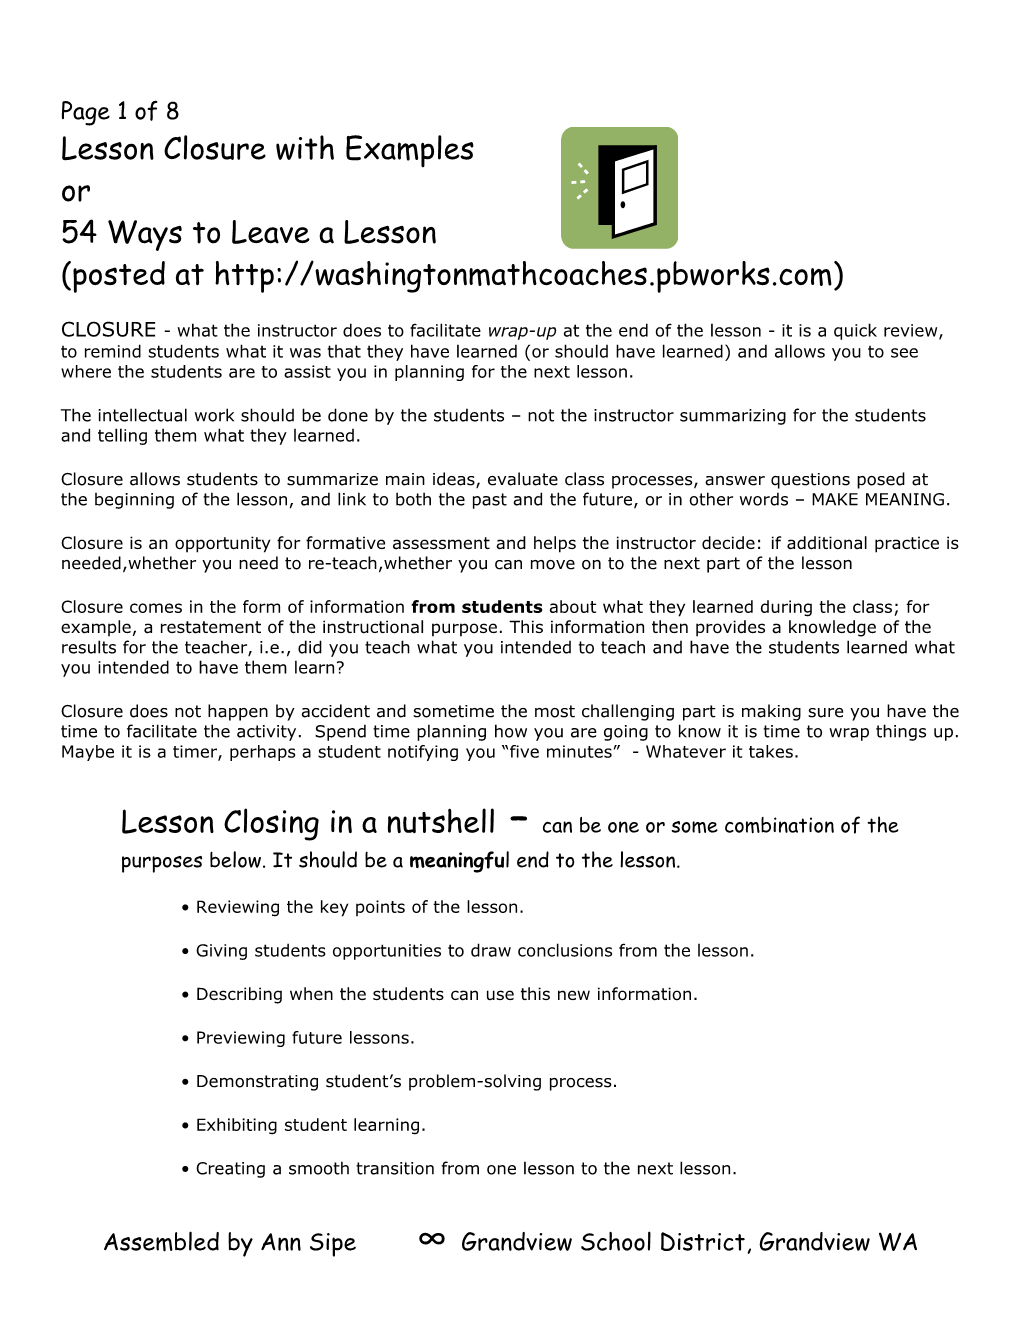 54 Ways to Leave a Lesson